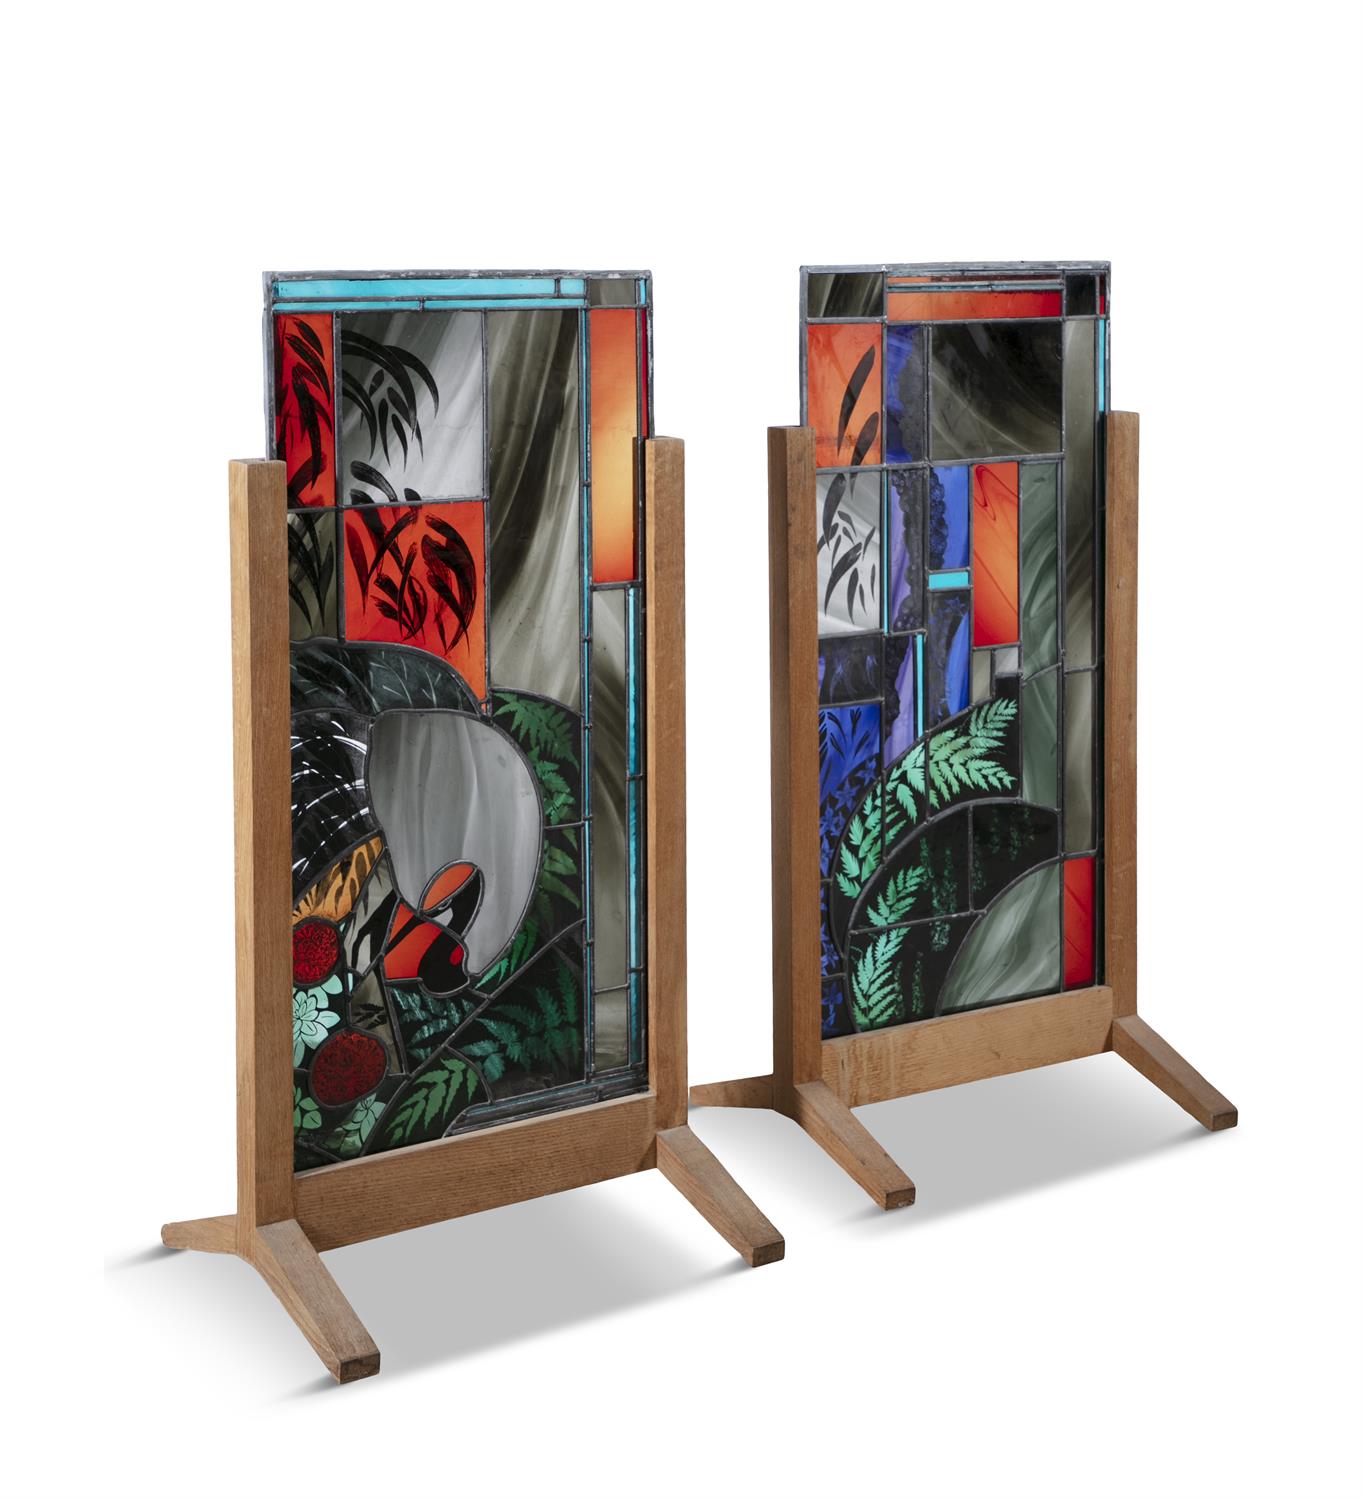 GLASS PANELS A pair of stained glass panels on oak stands. 66 x 48 x 130cm(h) including stands - Image 2 of 4